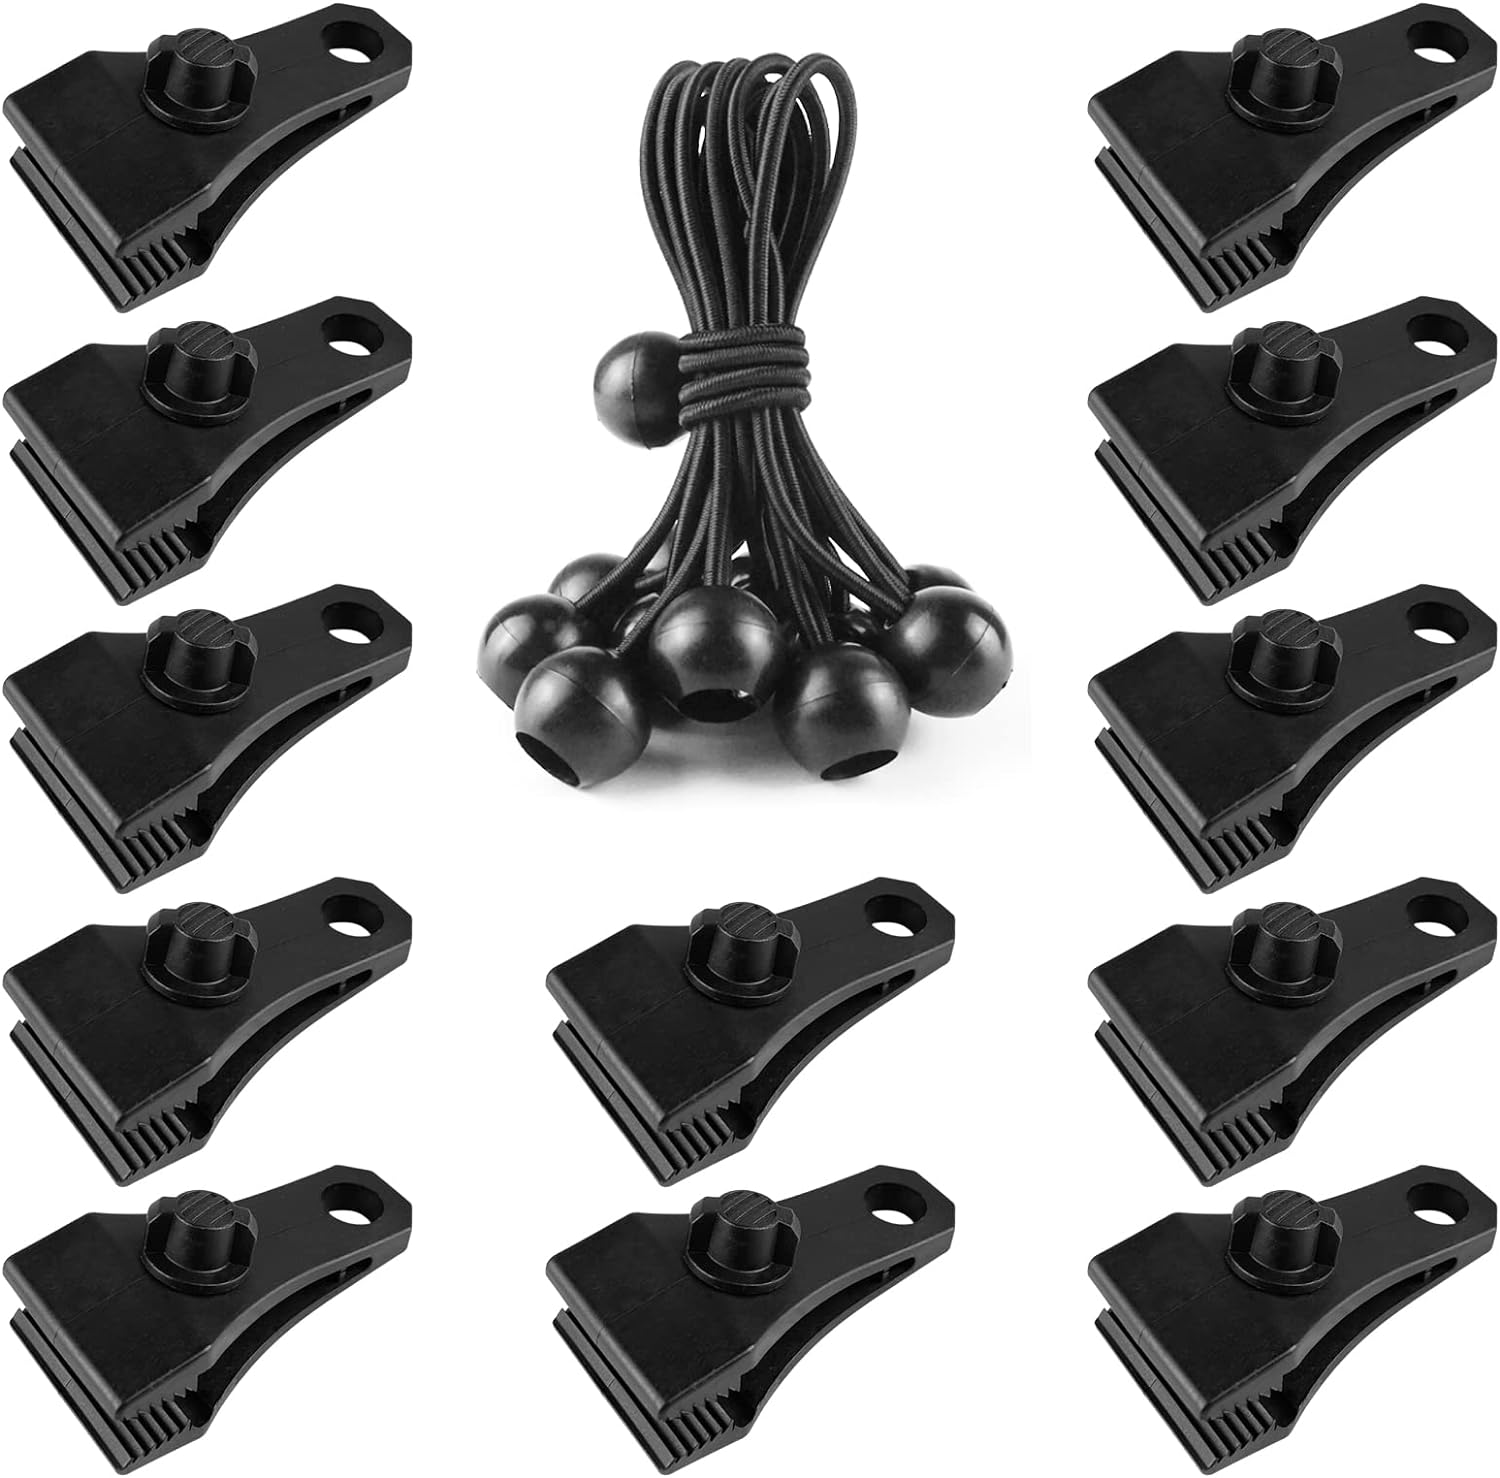 Clio Large Tarp Clips Heavy Duty Lock Grip 12 PCs Tarp Clamps Thumb Screw Tent Fasteners Clips with 12 PCs Ball Bungee Cords for Cam